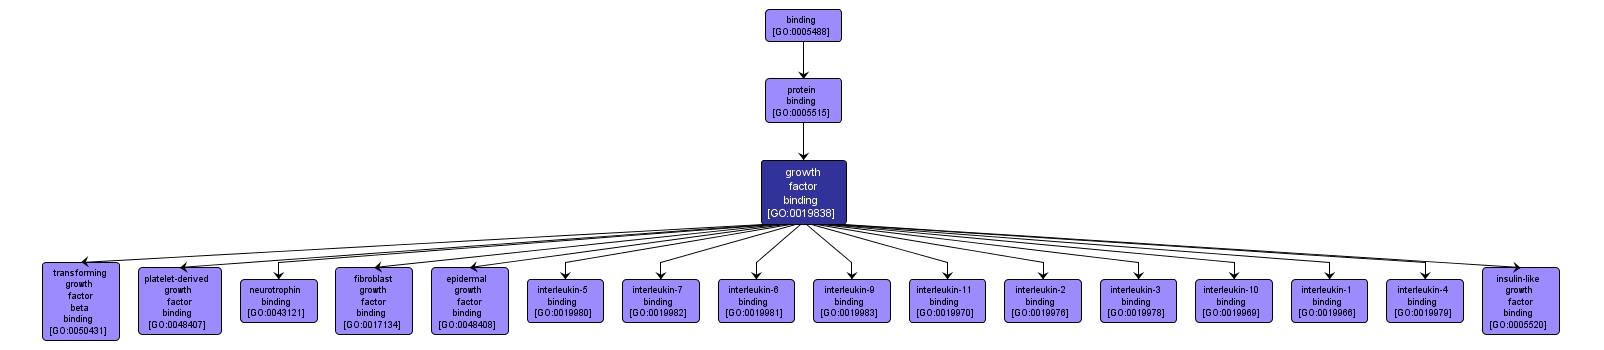 GO:0019838 - growth factor binding (interactive image map)